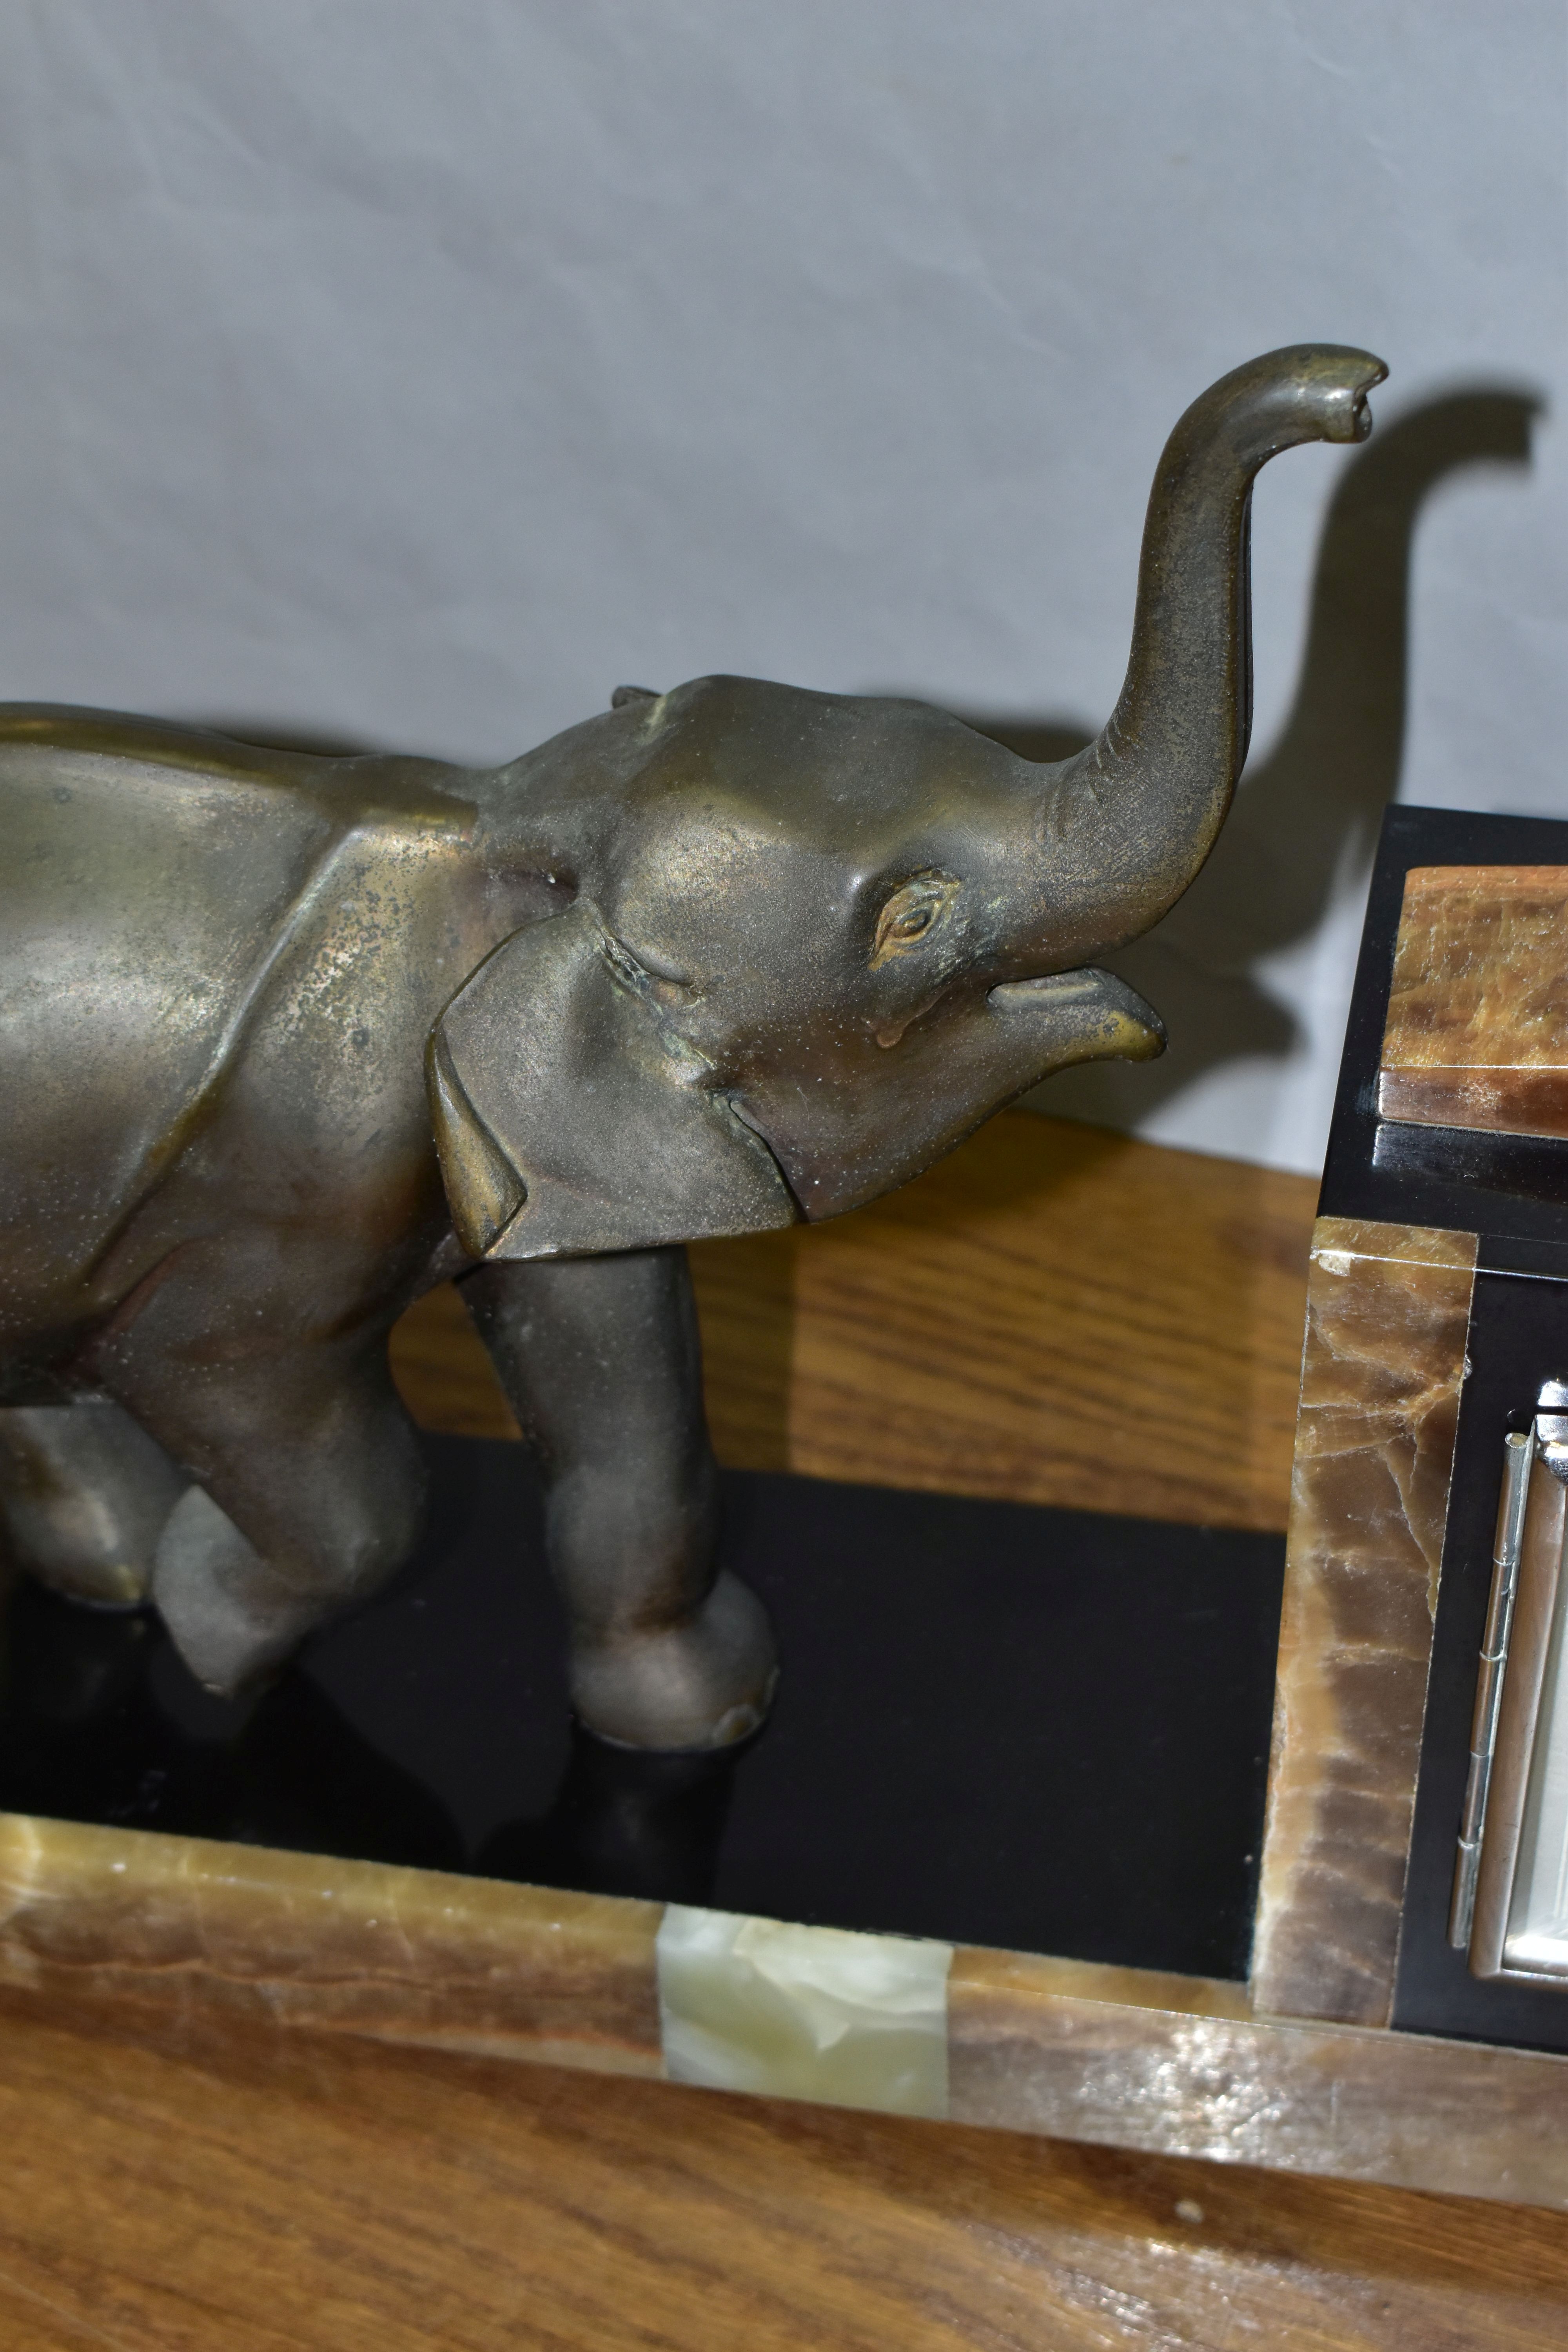 A FRENCH ART DECO MARBLE MANTEL CLOCK, Olivaux Renn, with key and pendulum and figure of an elephant - Image 3 of 8